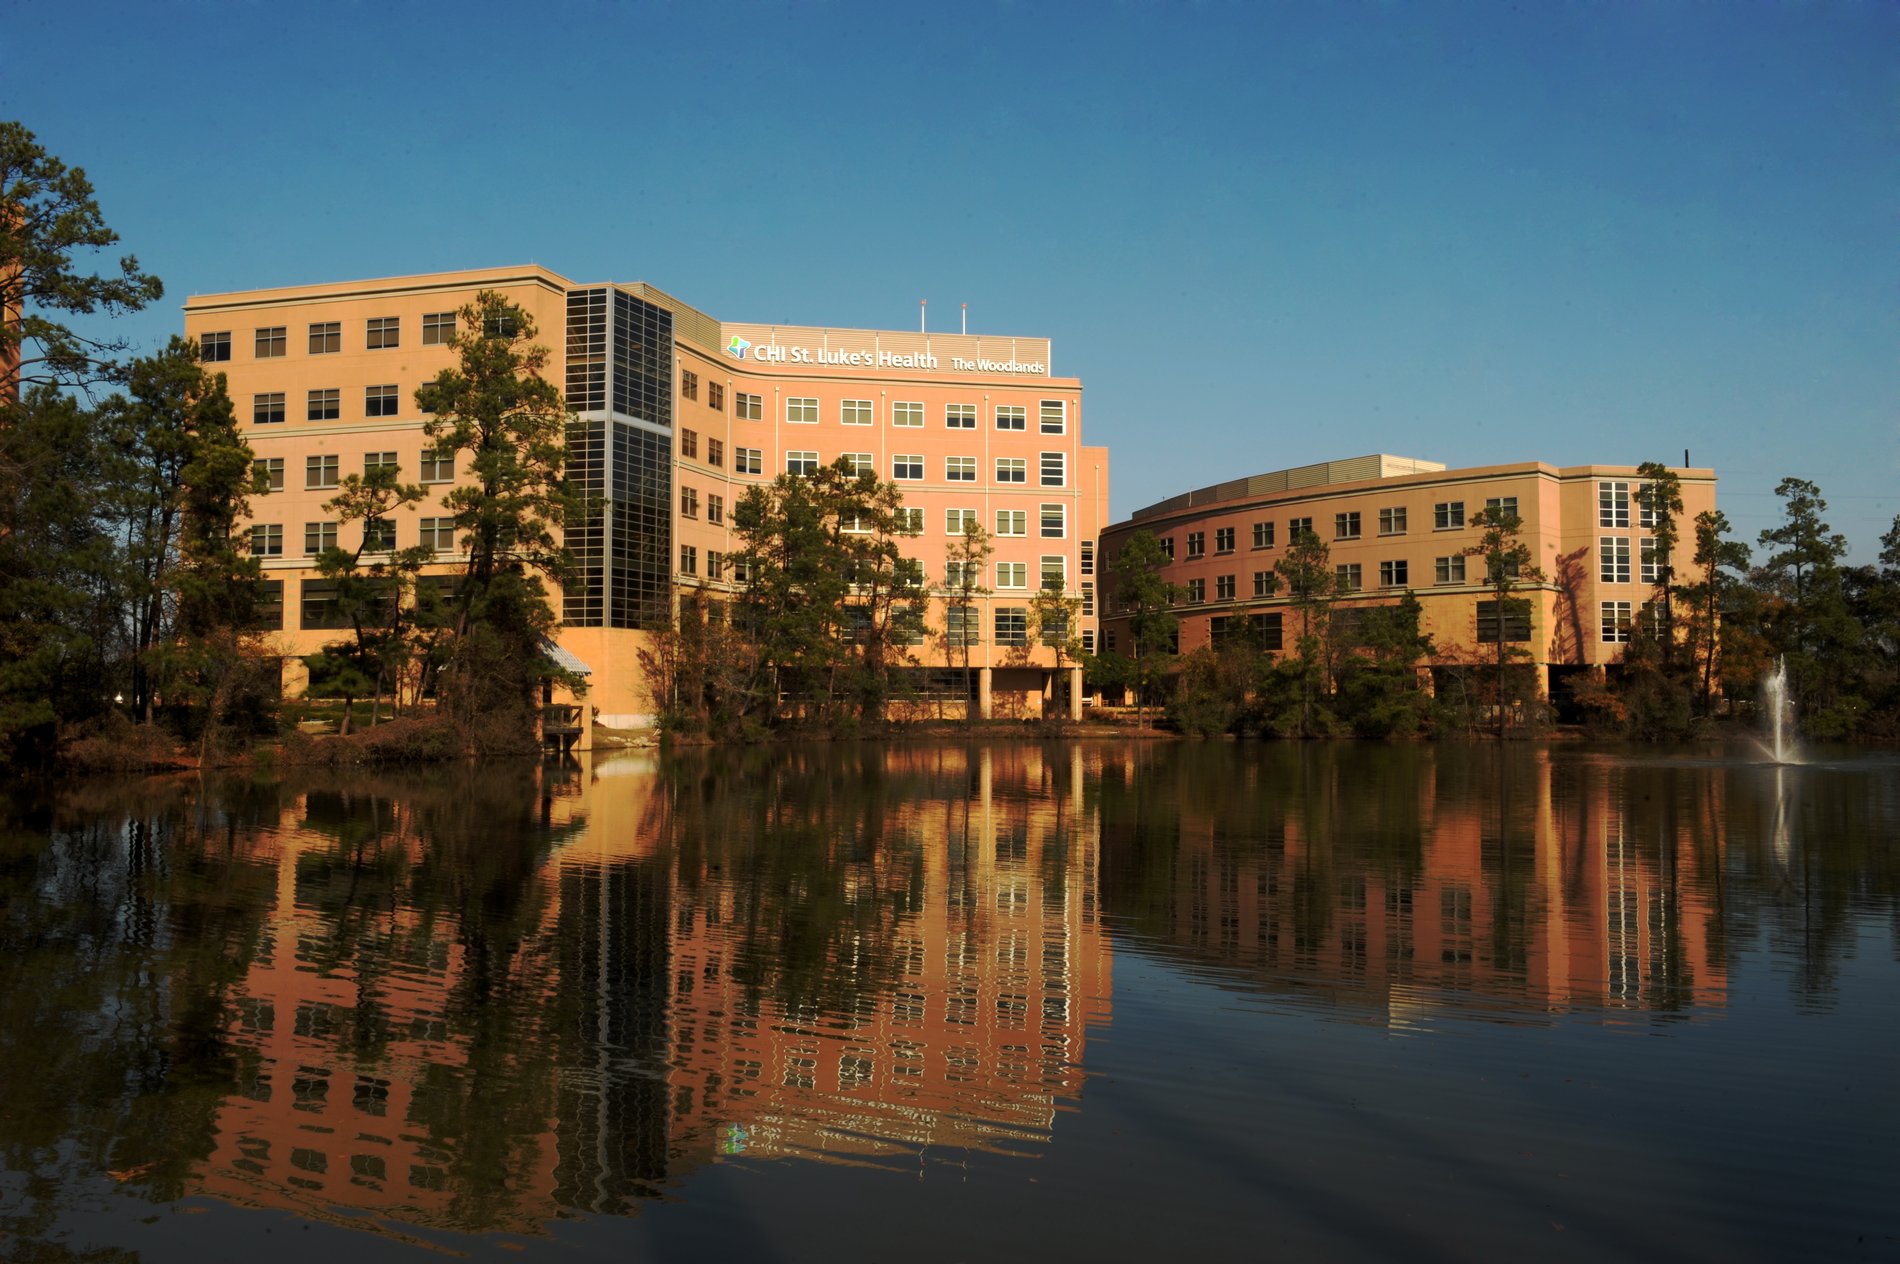 Center for Infectious Diseases at St. Luke's Health - The Woodlands Hospital - The Woodlands, TX